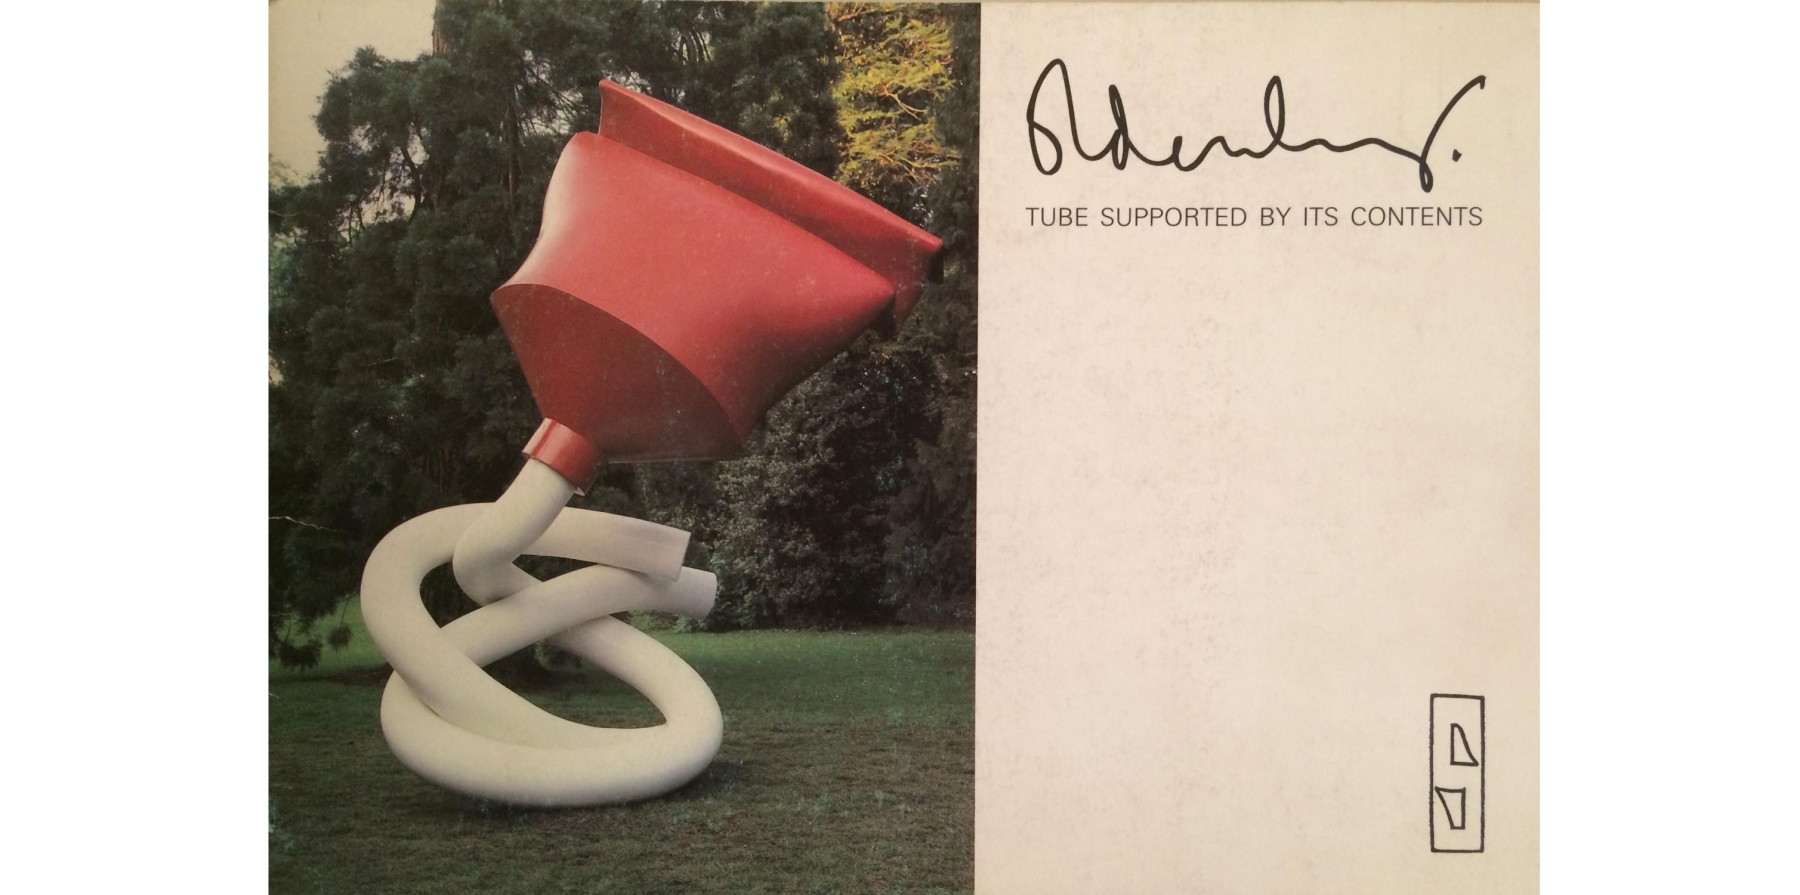 &nbsp; &nbsp; &nbsp; &nbsp; &nbsp; &nbsp; &nbsp; &nbsp; &nbsp; &nbsp; &nbsp; &nbsp; &nbsp; &nbsp; &nbsp; &nbsp; &nbsp; &nbsp; &nbsp; &nbsp; &nbsp; &nbsp; &nbsp; &nbsp; &nbsp; &nbsp; &nbsp; &nbsp; &nbsp; &nbsp; &nbsp; &nbsp; &nbsp; &nbsp; &nbsp; &nbsp; &nbsp; &nbsp; &nbsp; &nbsp; &nbsp; &nbsp; &nbsp; &nbsp; &nbsp; &nbsp; Catalogue cover, Oldenburg: Tube Supported by its Contents. Dusseldorf: Galerie Schmela, 1985.